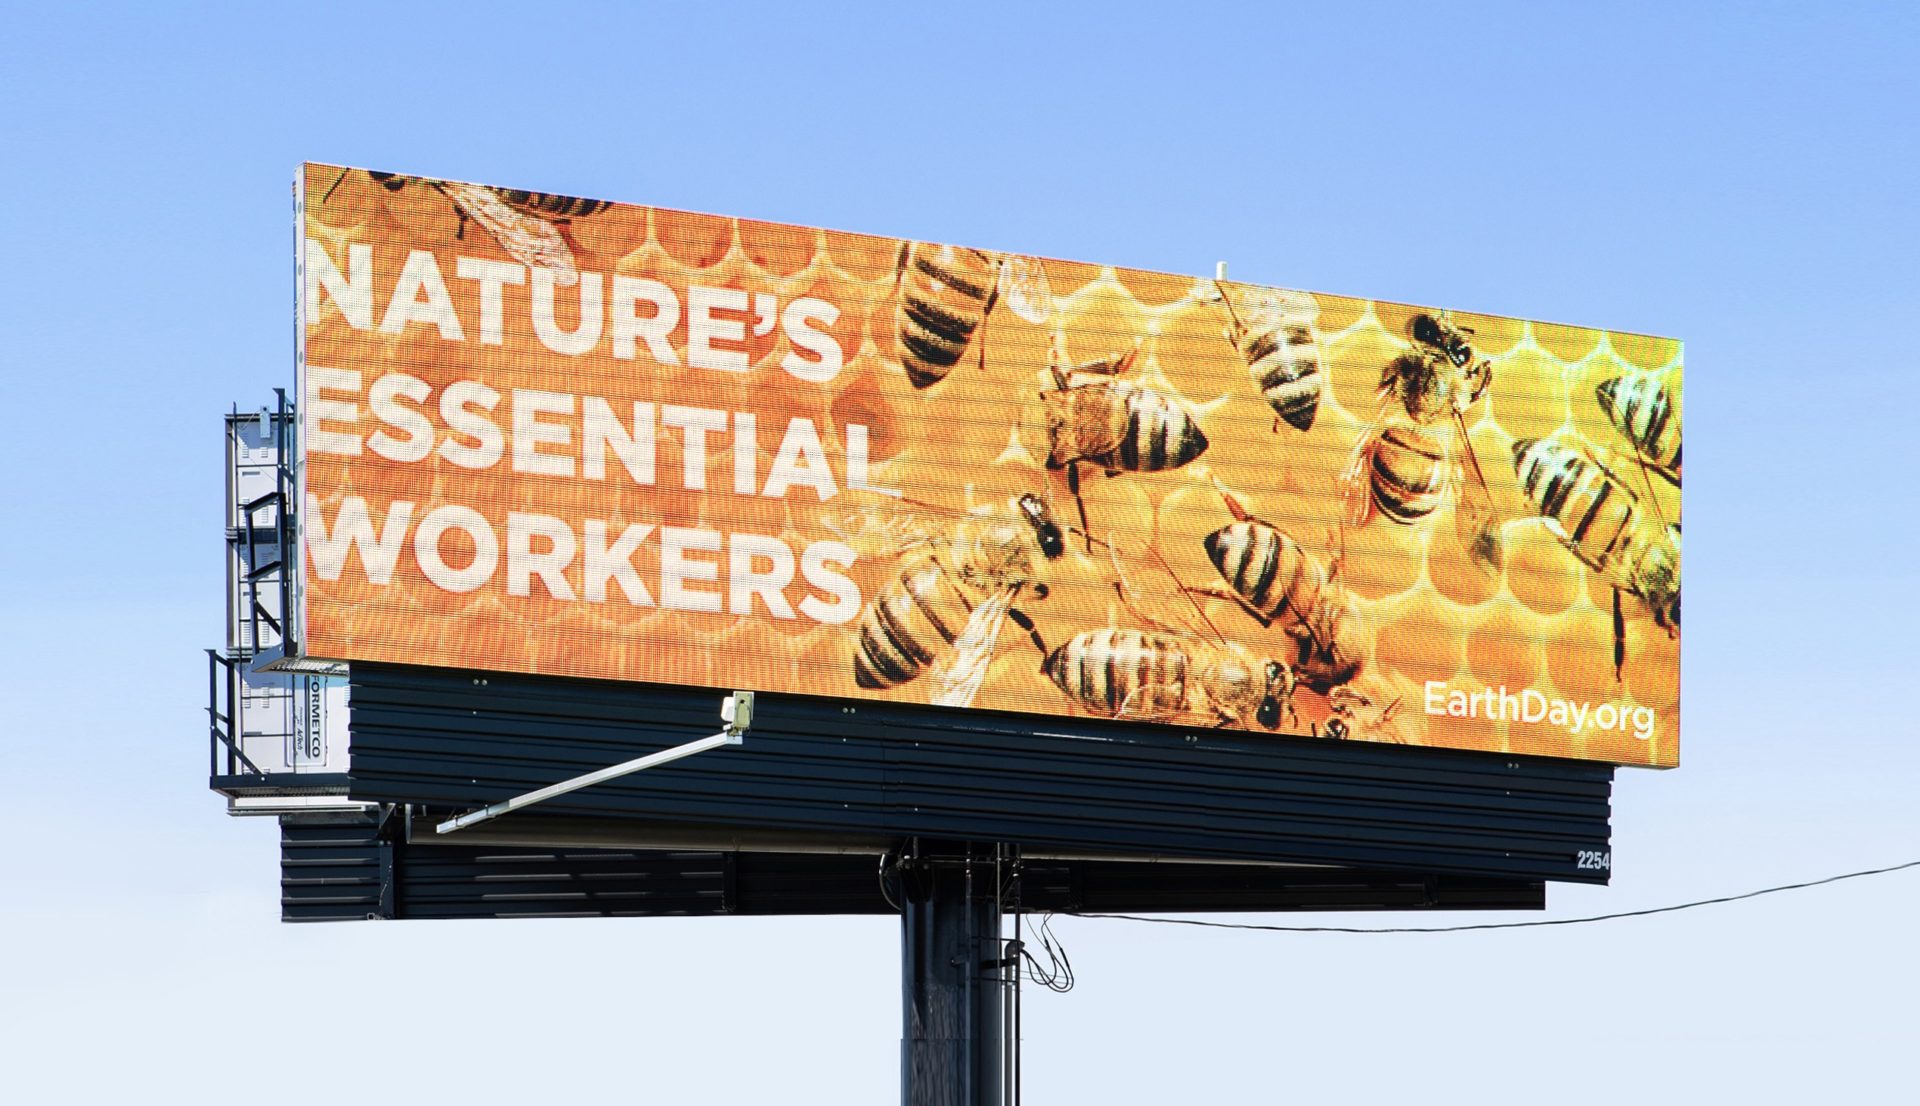 Out of home bulletin for Earthday.org showing bees and headline "nature's essential workers"